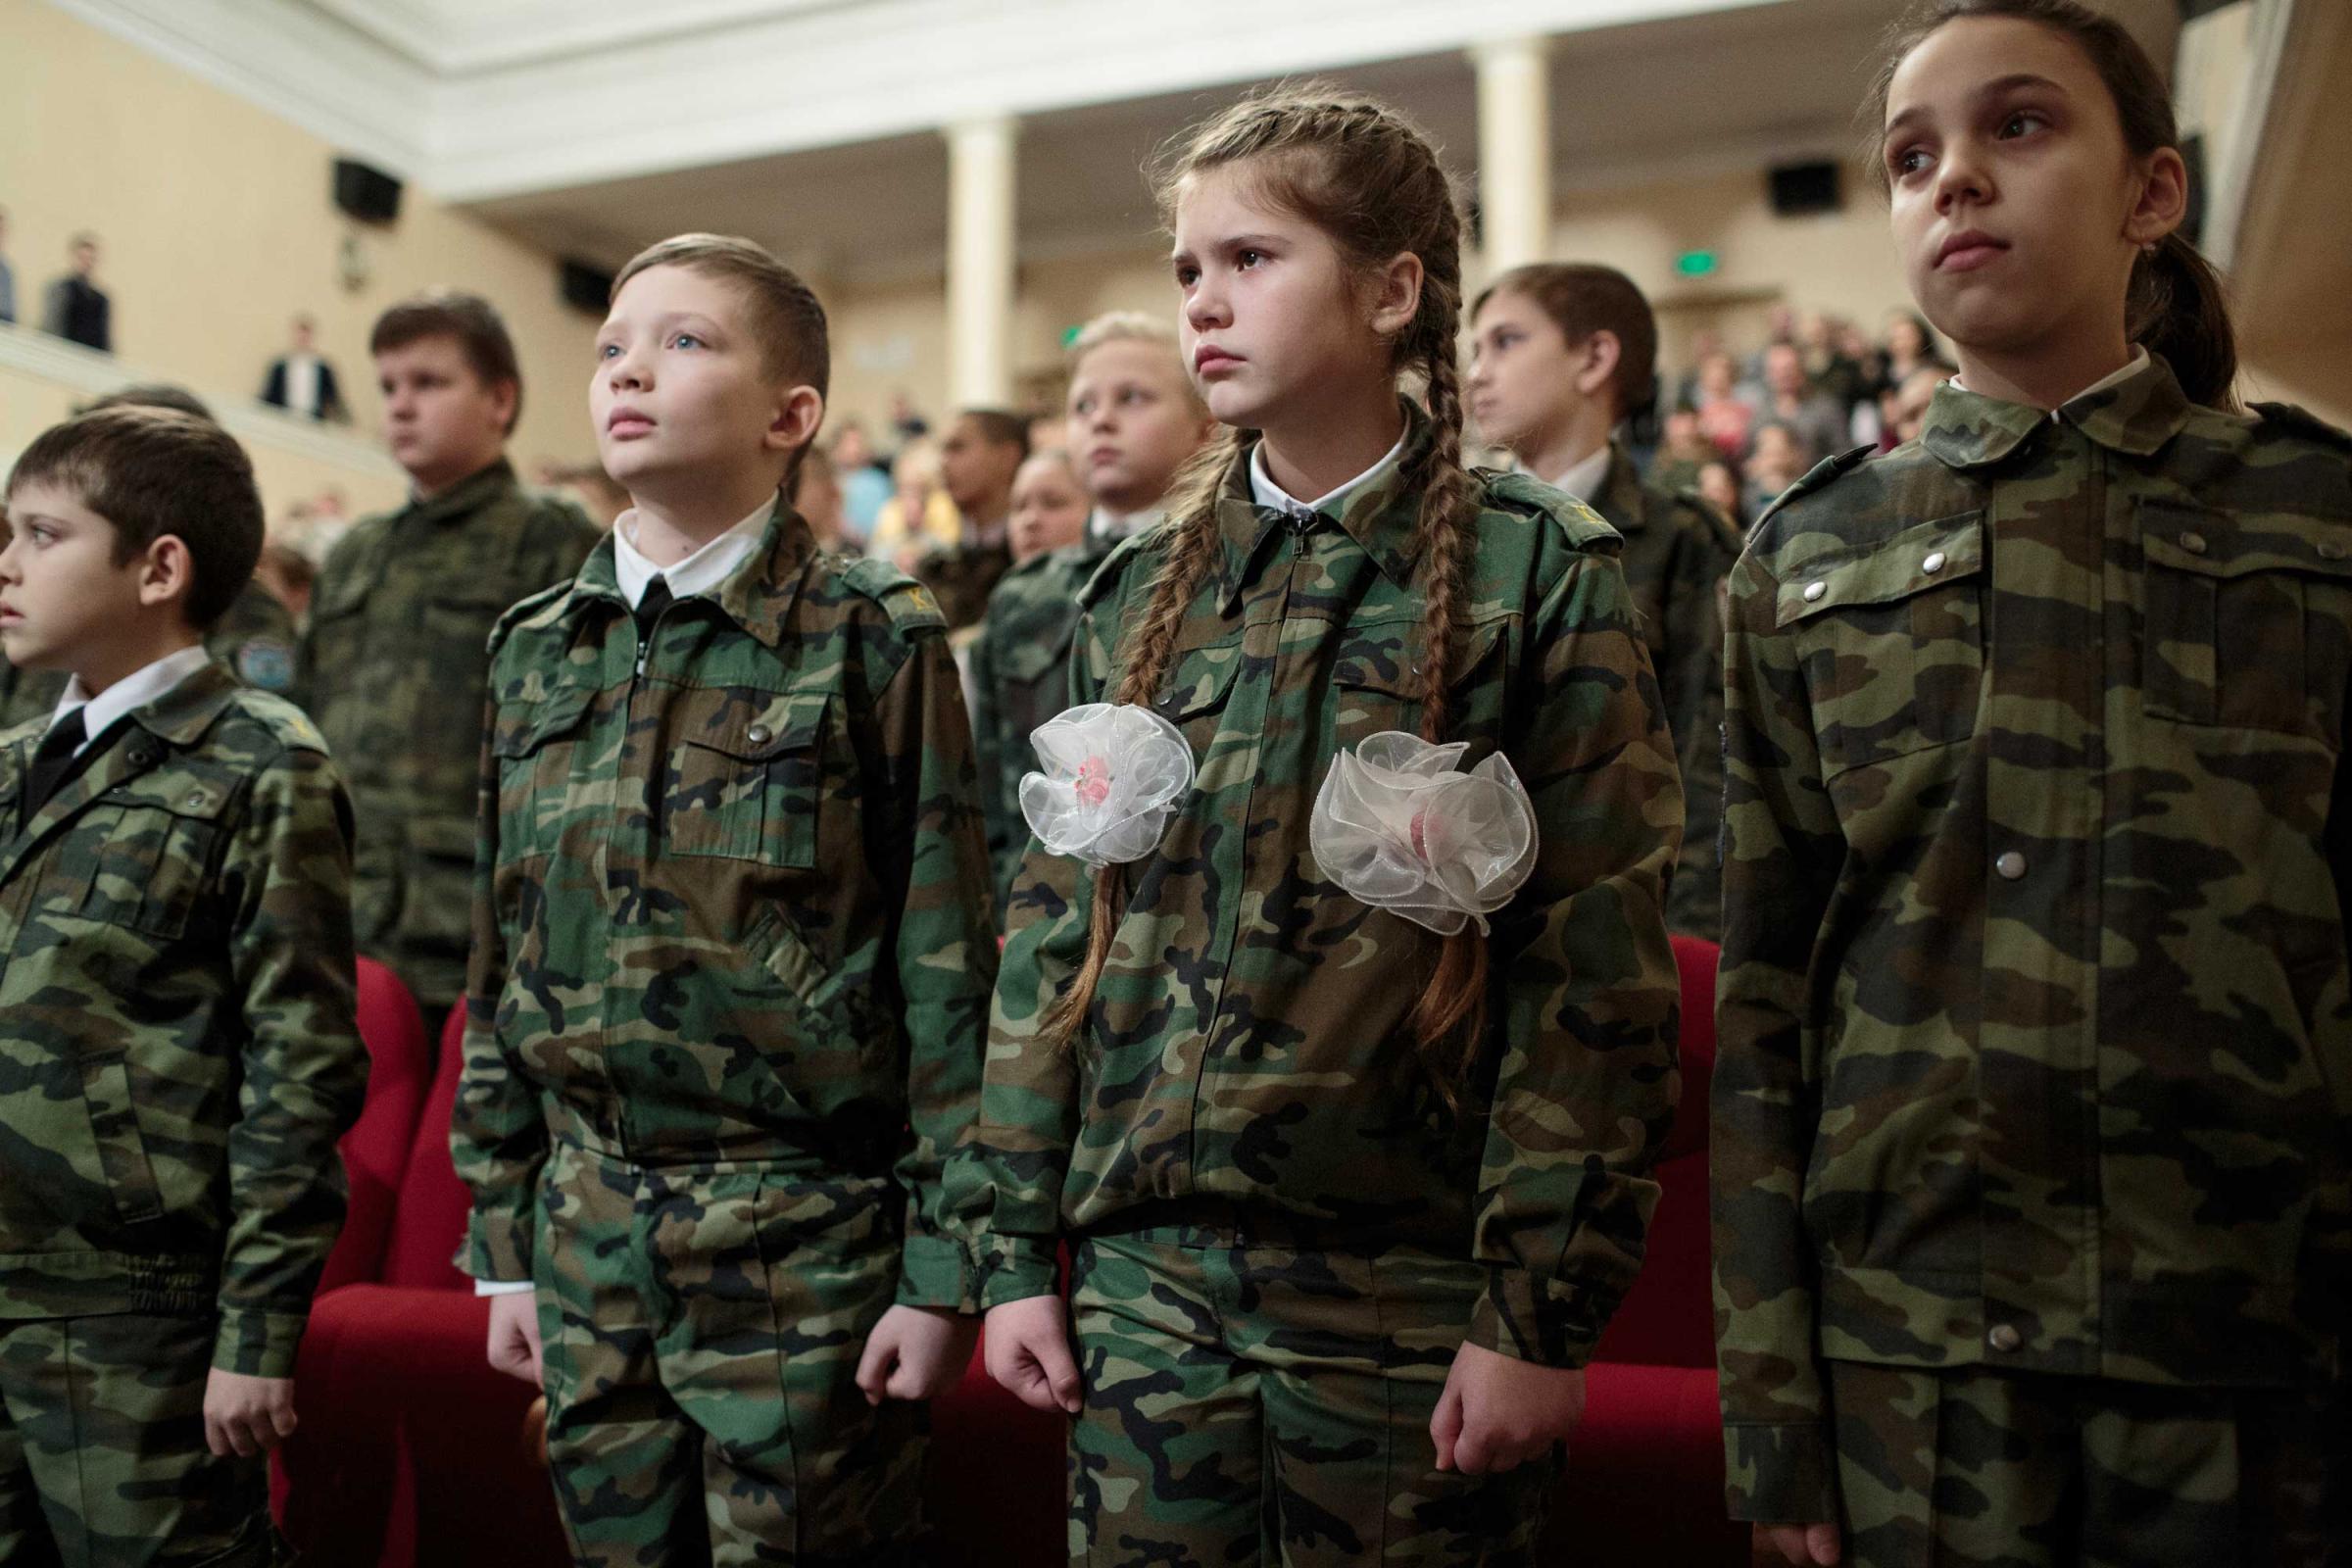 Cadet students perform at a local theater in Sergiyev Posad, Russia.